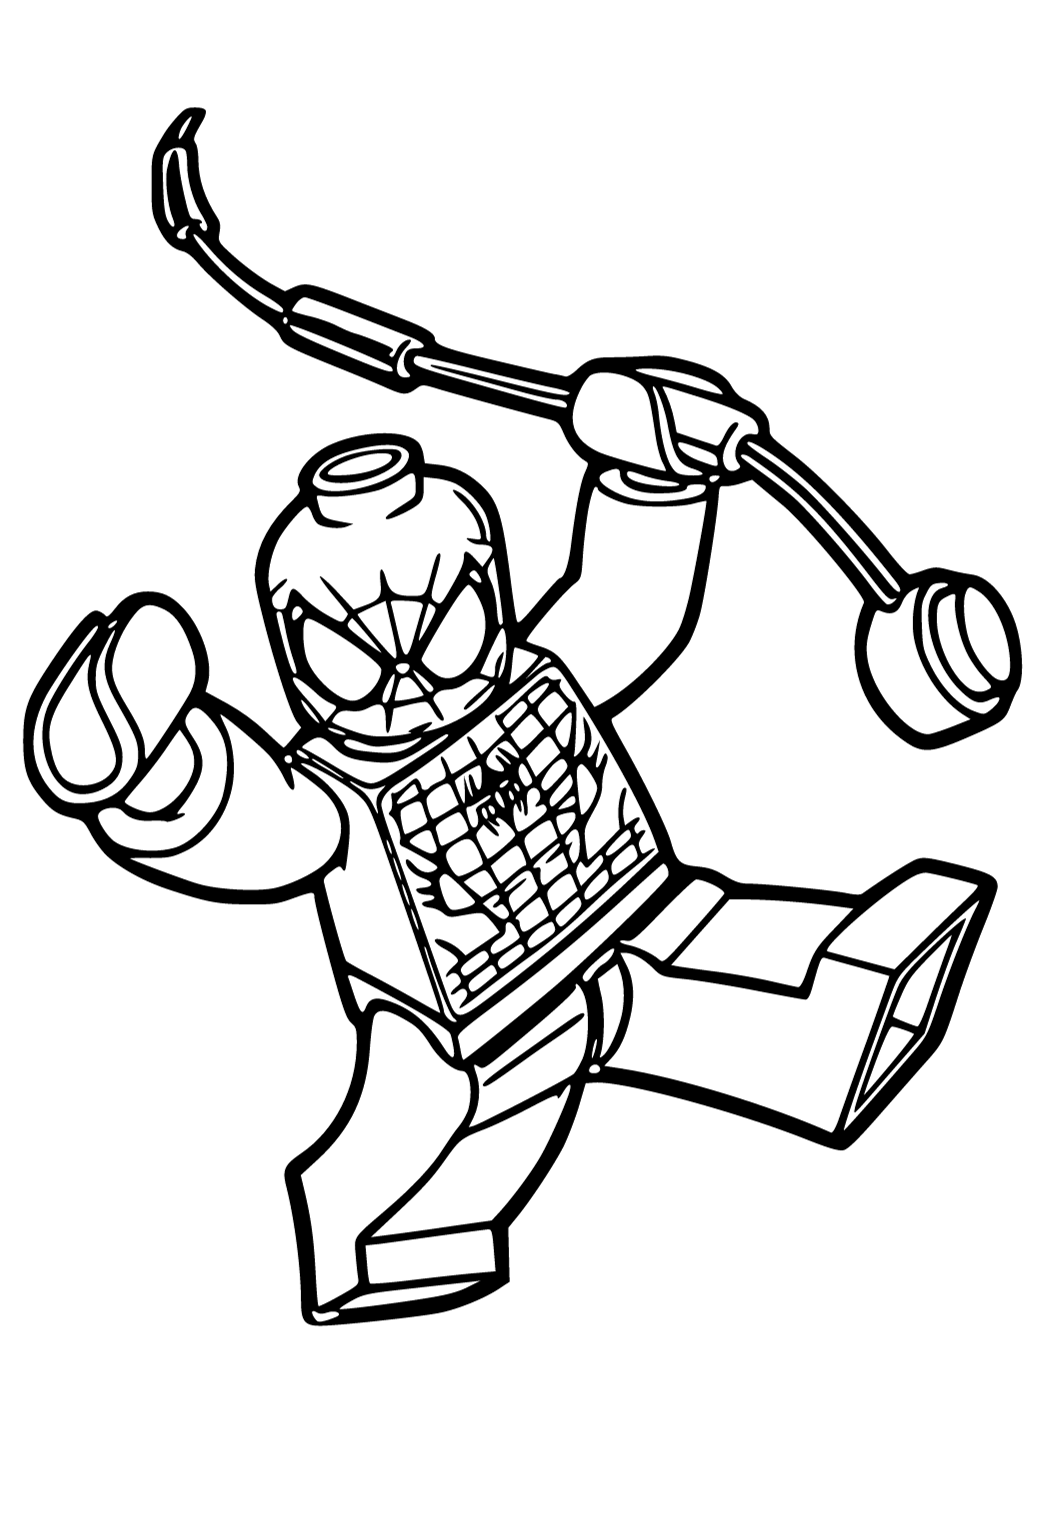 Free Printable Spiderman Figurine Coloring Page for Adults and Kids 